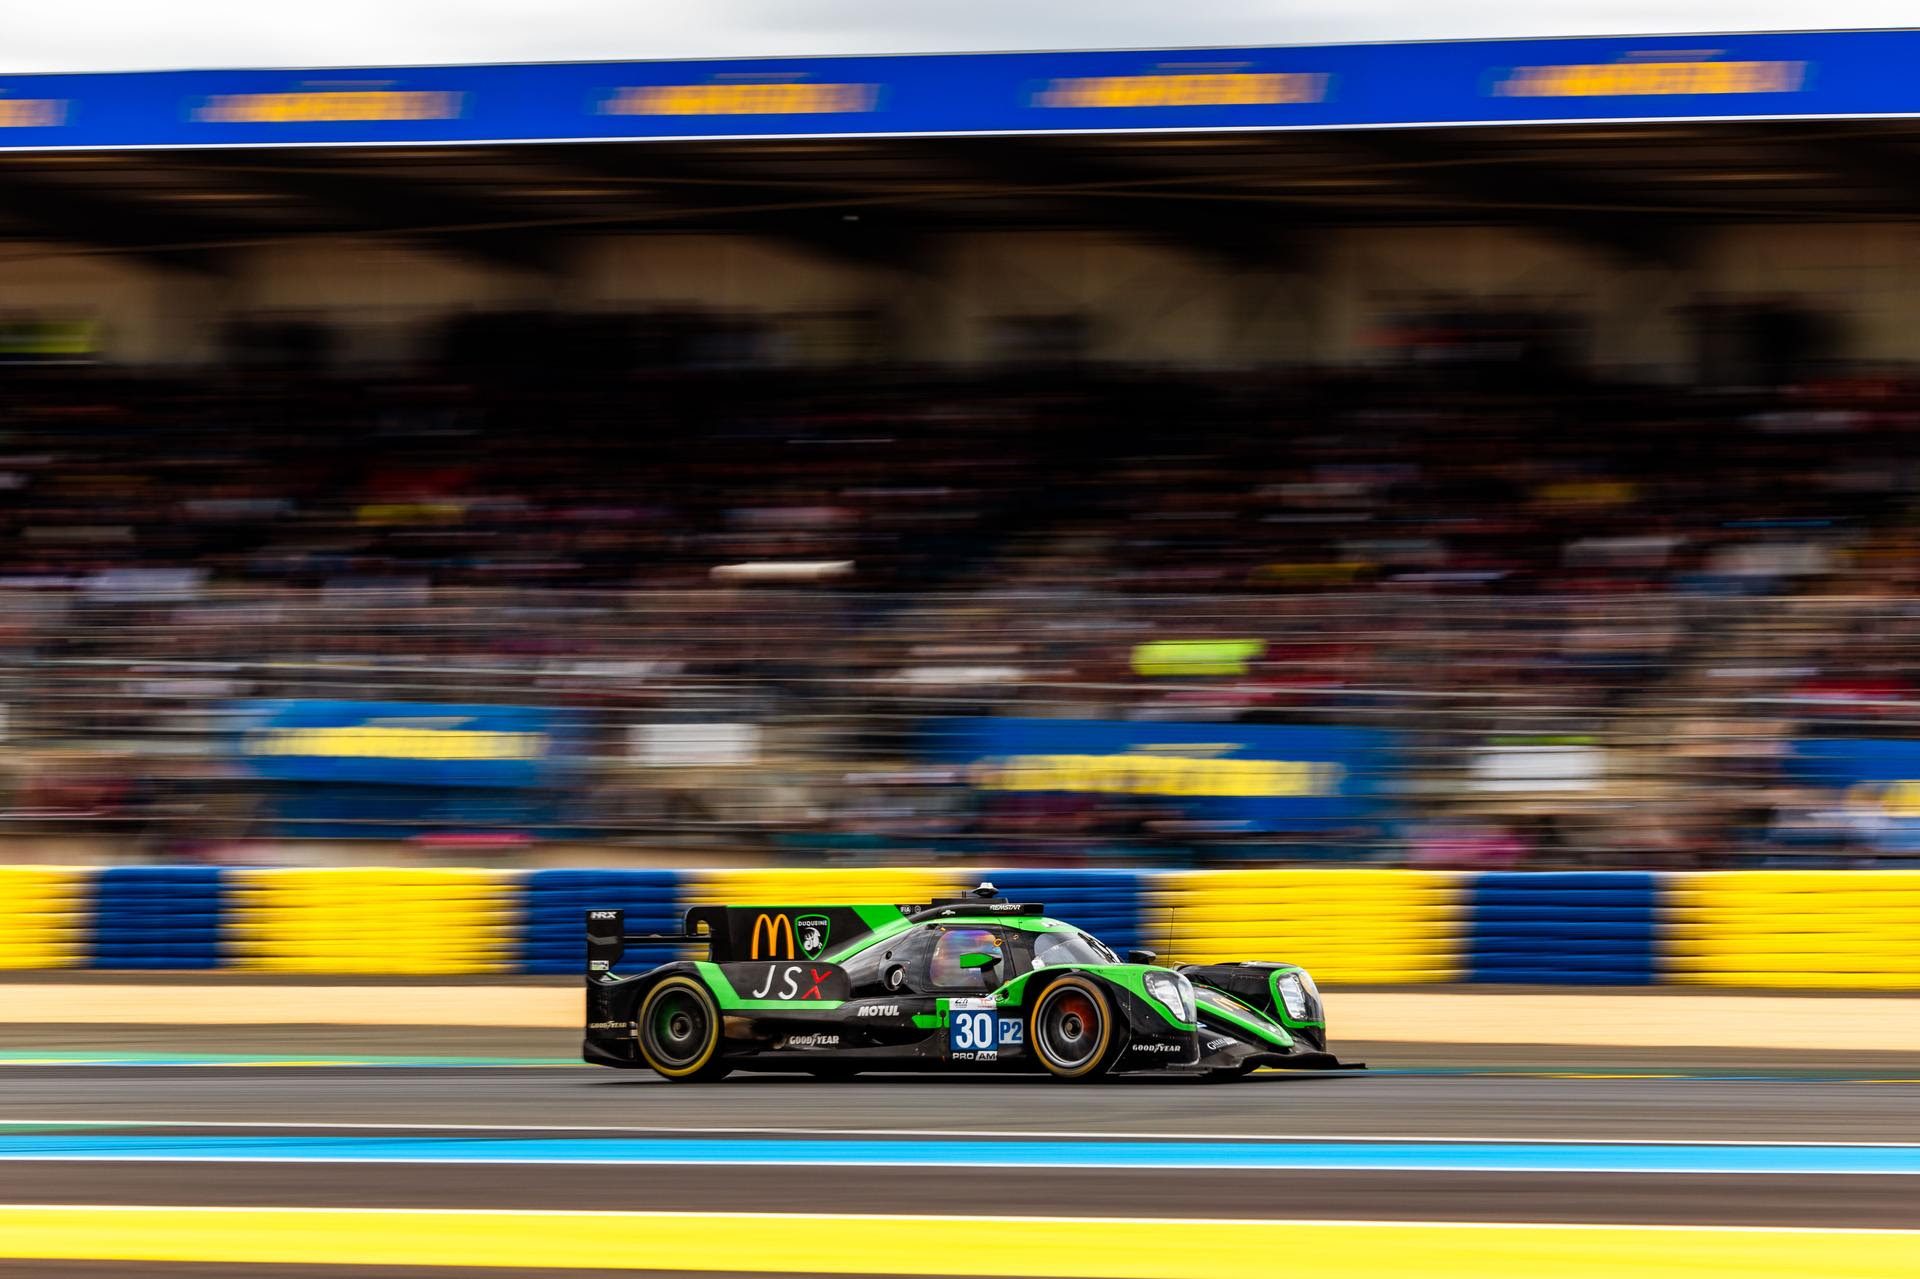 THE DUQUEINE TEAM FORCED TO WITHDRAW DUE TO ENGINE FAILURE. CAR NUMBER 30 LEAVES THE LE MANS TRACK IN THIRD POSITION PRO/AM CLASS AT THE EIGHTH HOUR